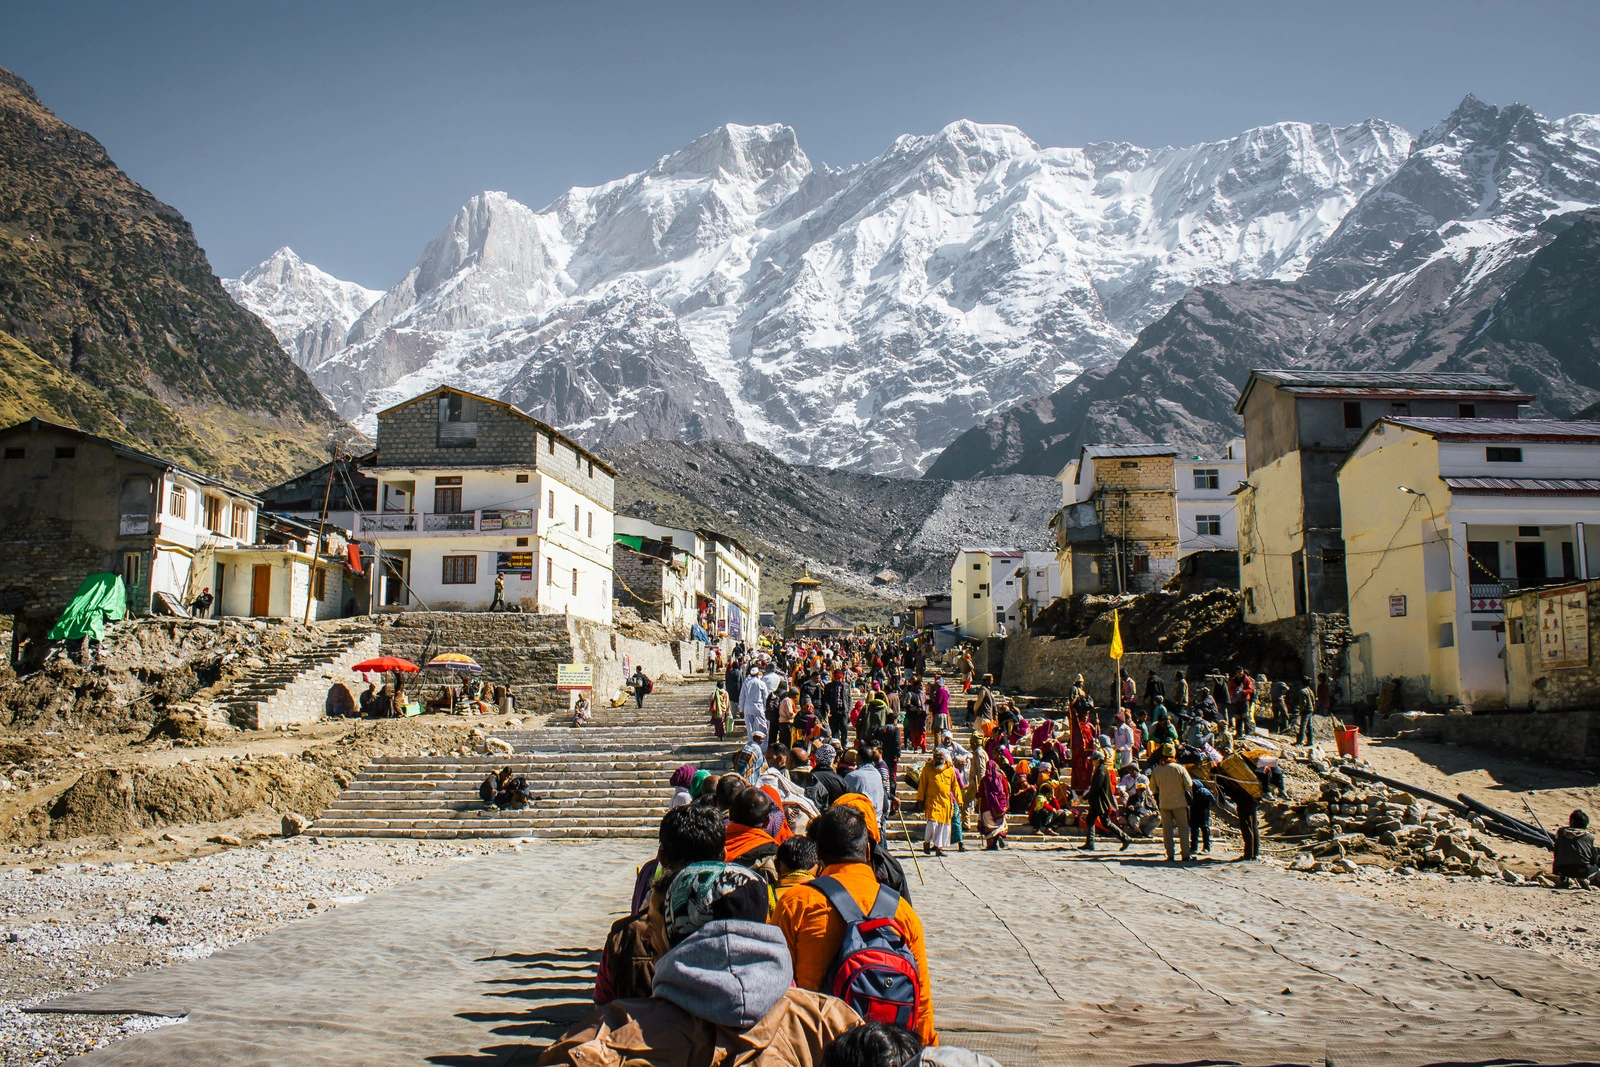 Exterior view of Kedarnath Temple showcasing its intricate architectural details and scenic surroundings.